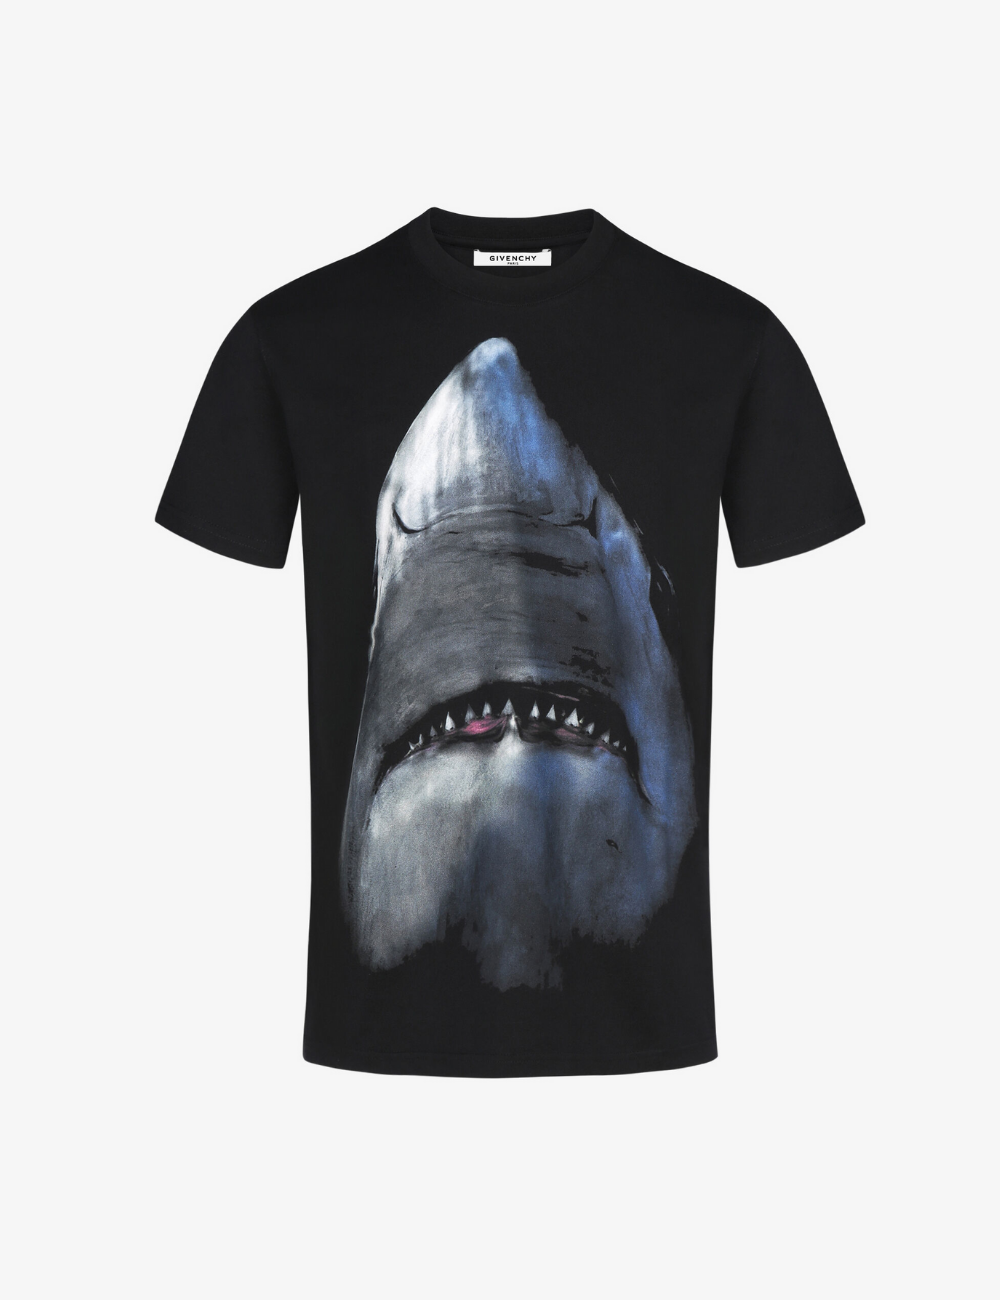 Givenchy Shark Printed T-Shirt - Shop Streetwear, Sneakers, Slippers and Gifts online | Malaysia - The Factory KL